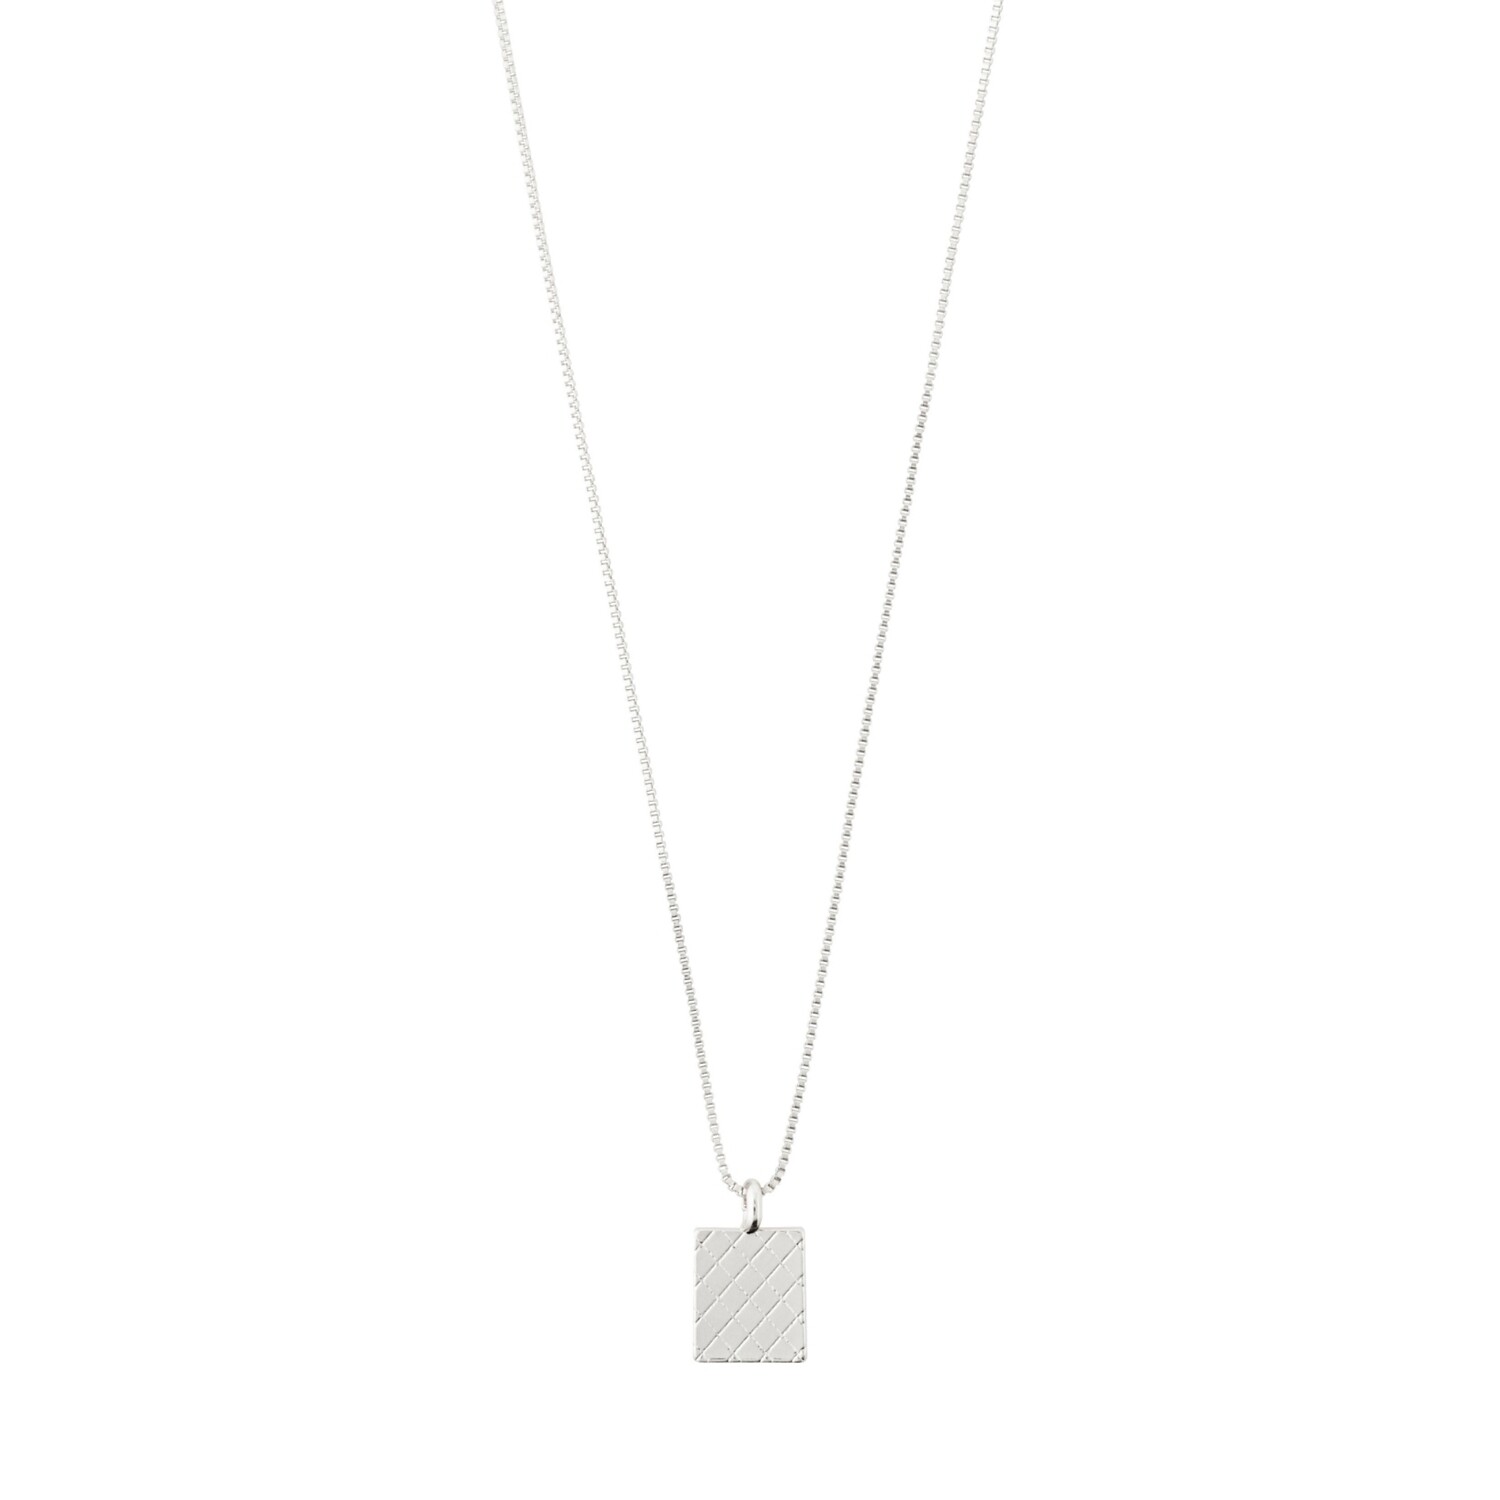 Pilgrim Silver Blossom Recycled Square Coin Necklace